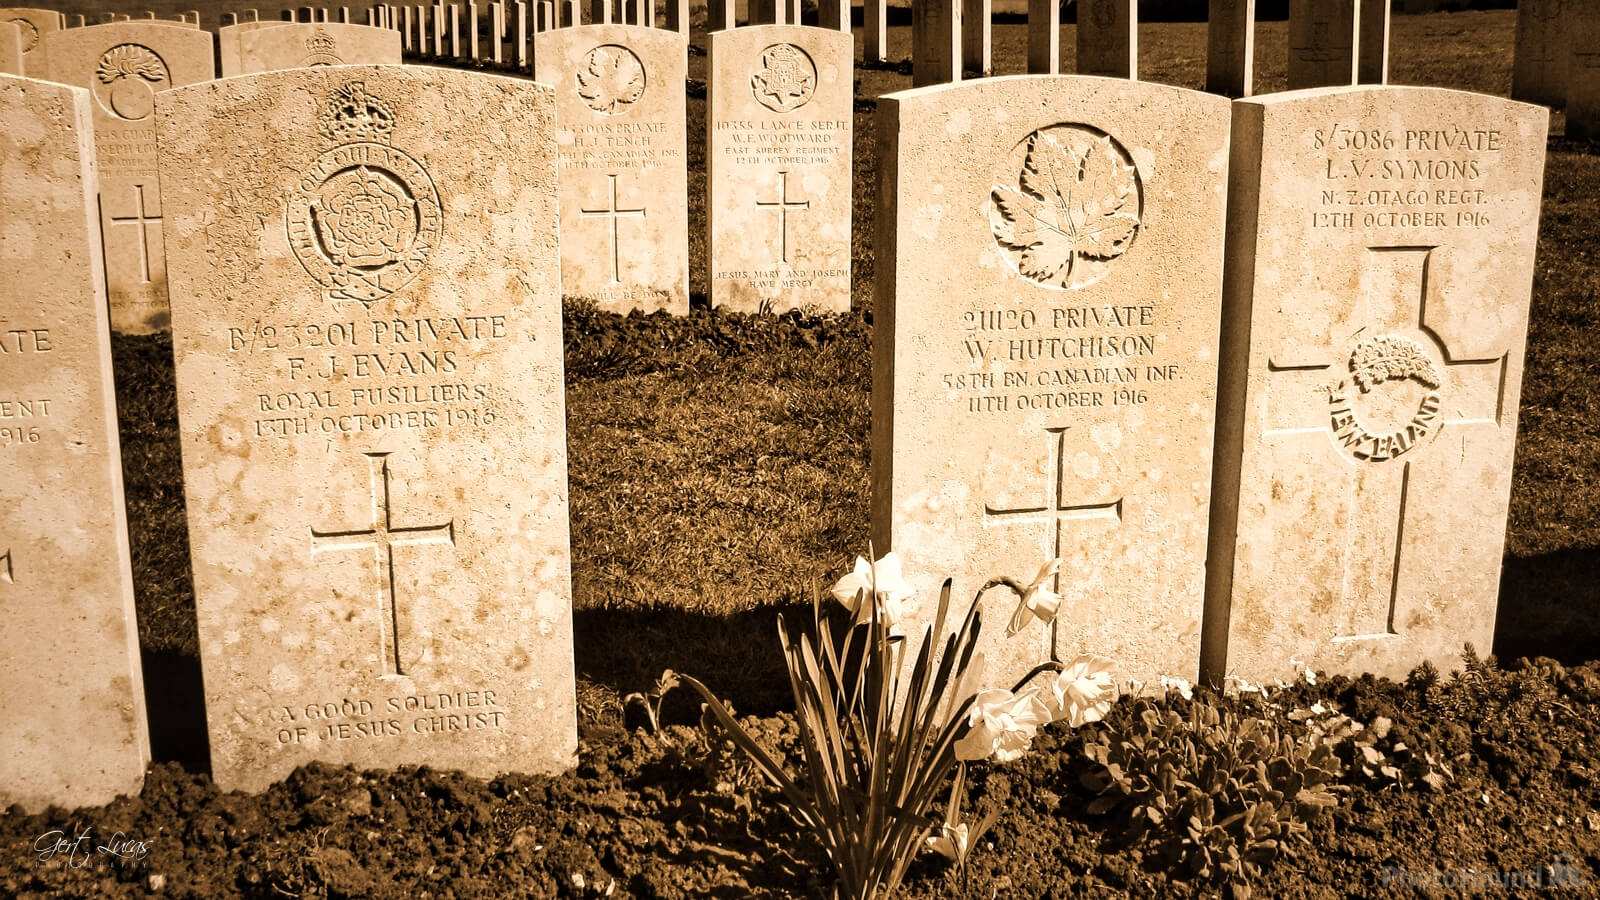 Image of Étaples Military Cemetery by Gert Lucas